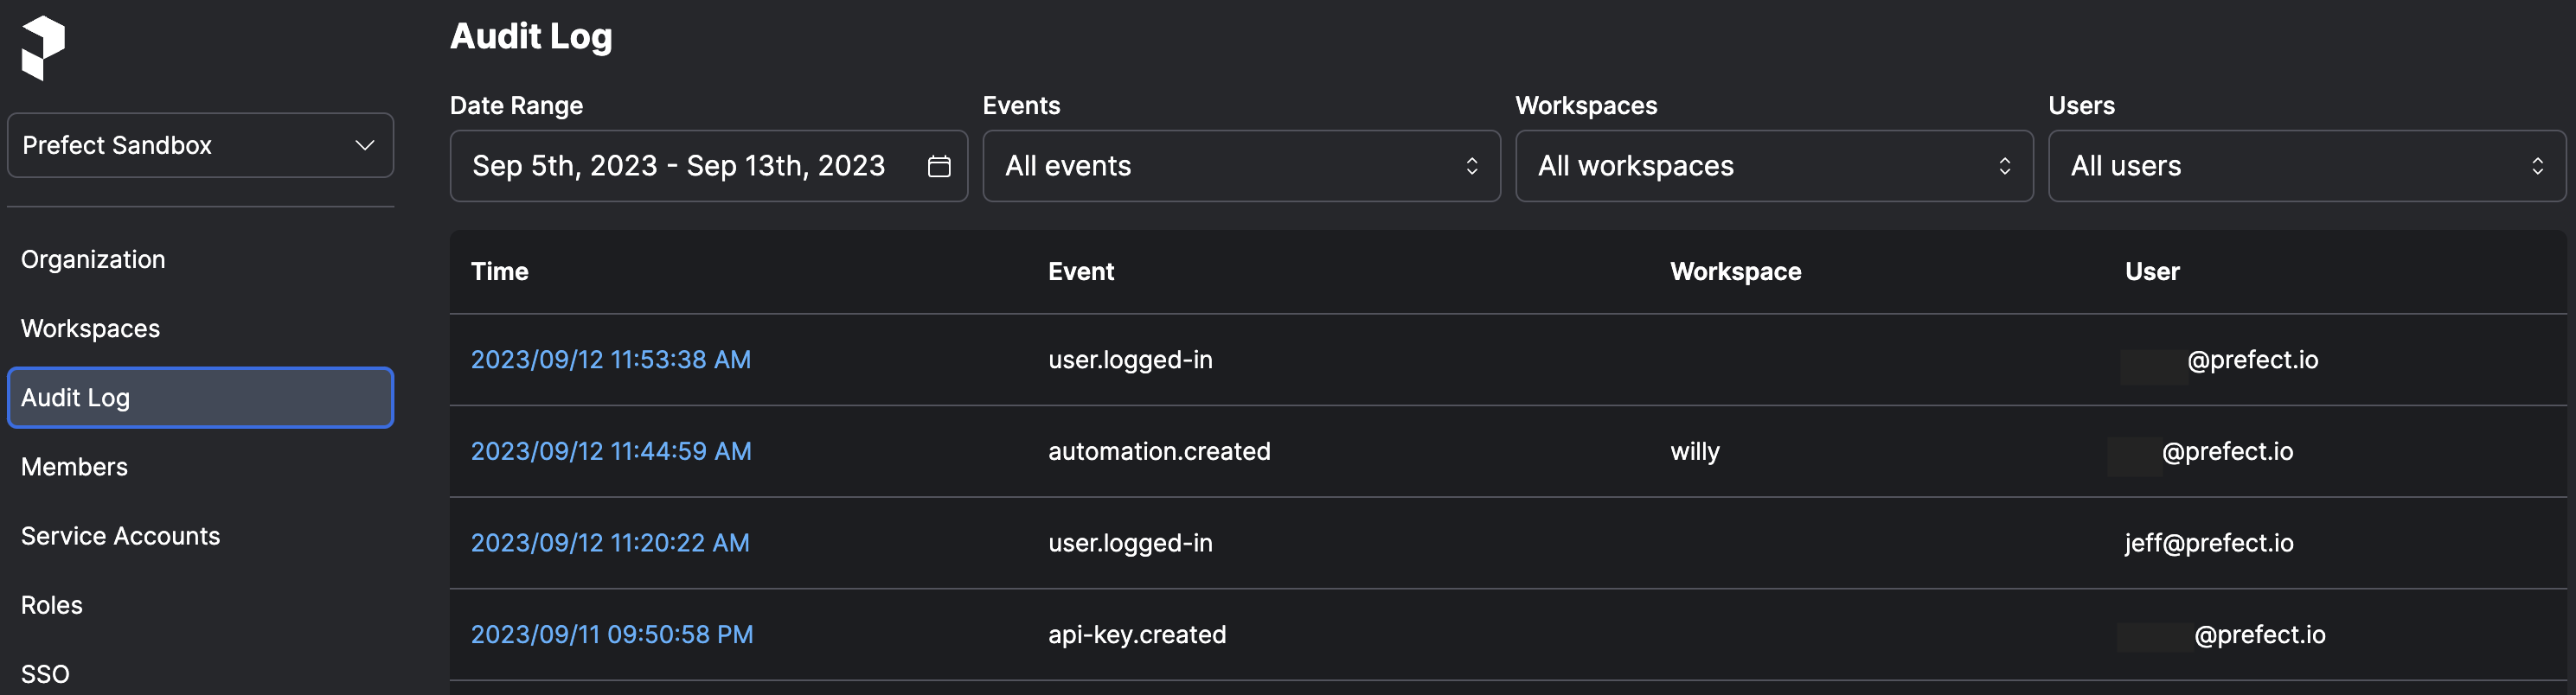 Viewing audit logs for an account in the Prefect Cloud UI.